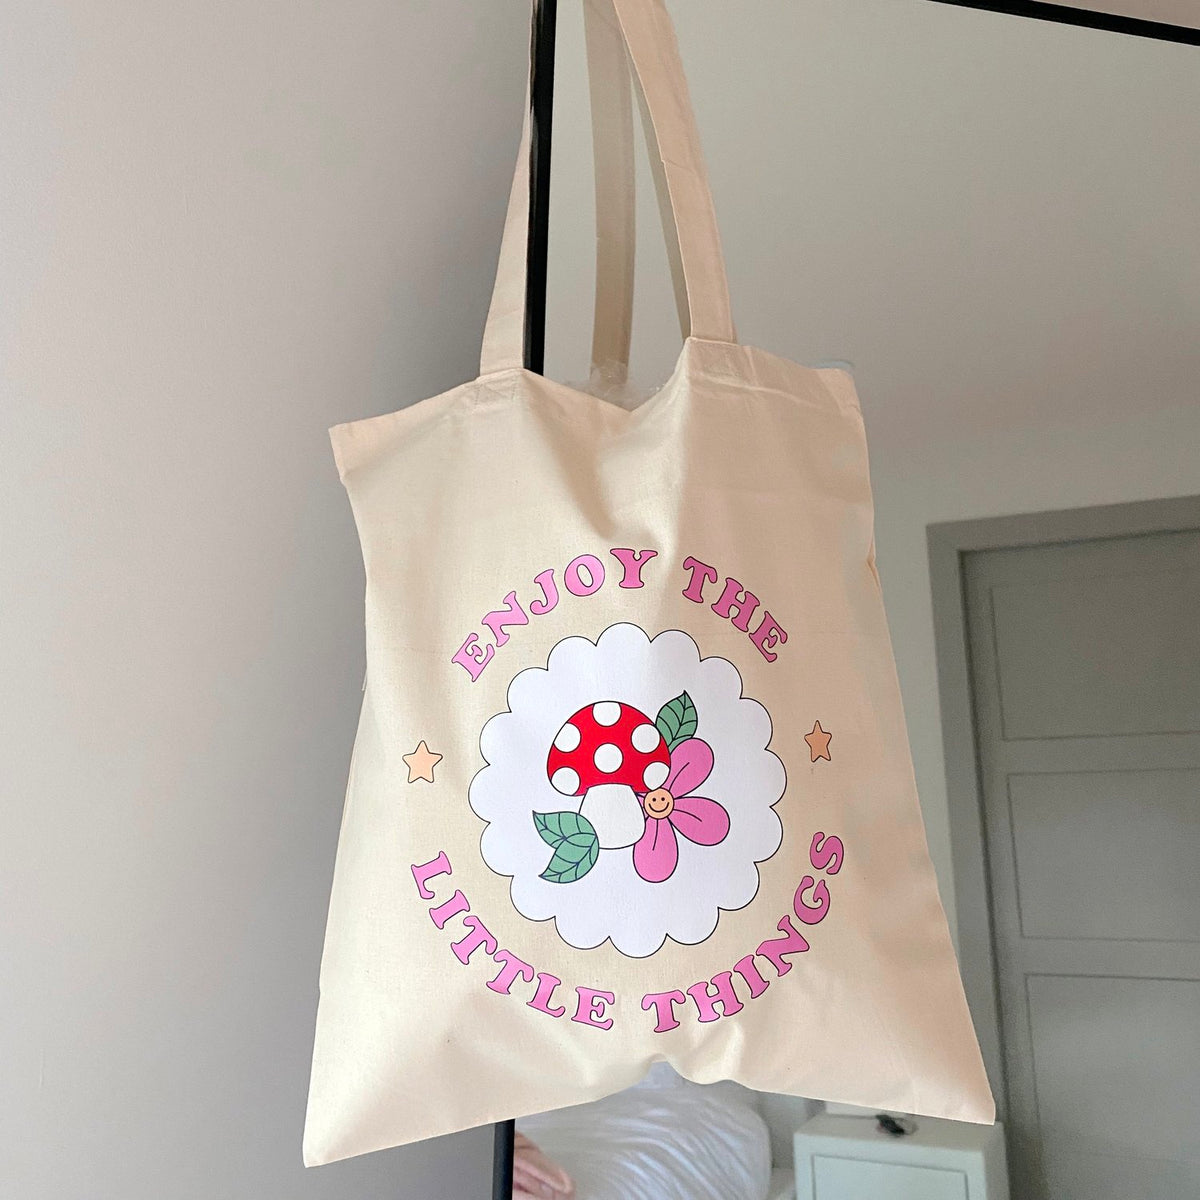 Enjoy The Little Things Tote Bag